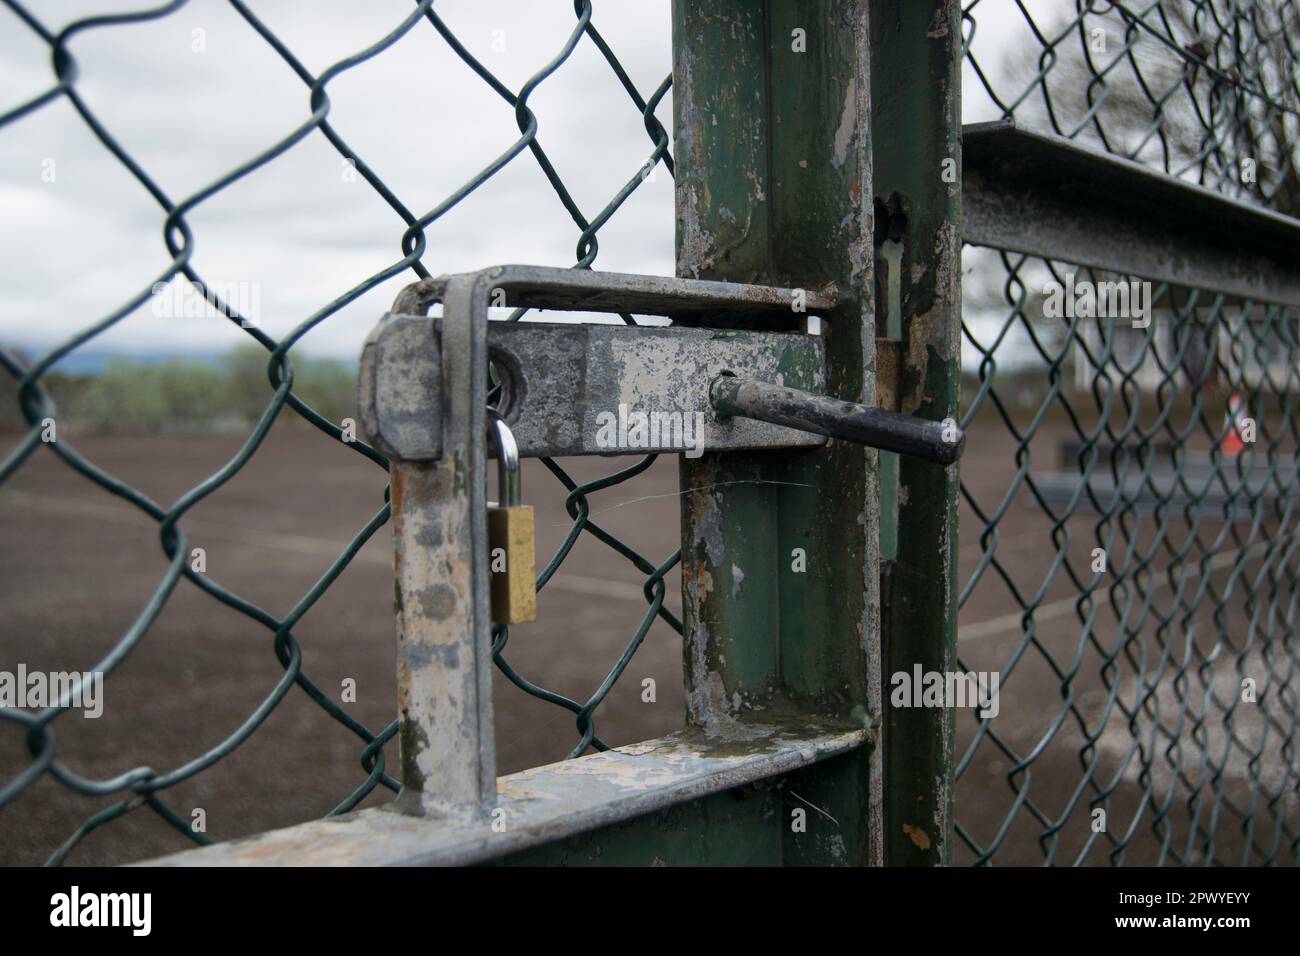 Padlocked gate of some tennis courts Stock Photo